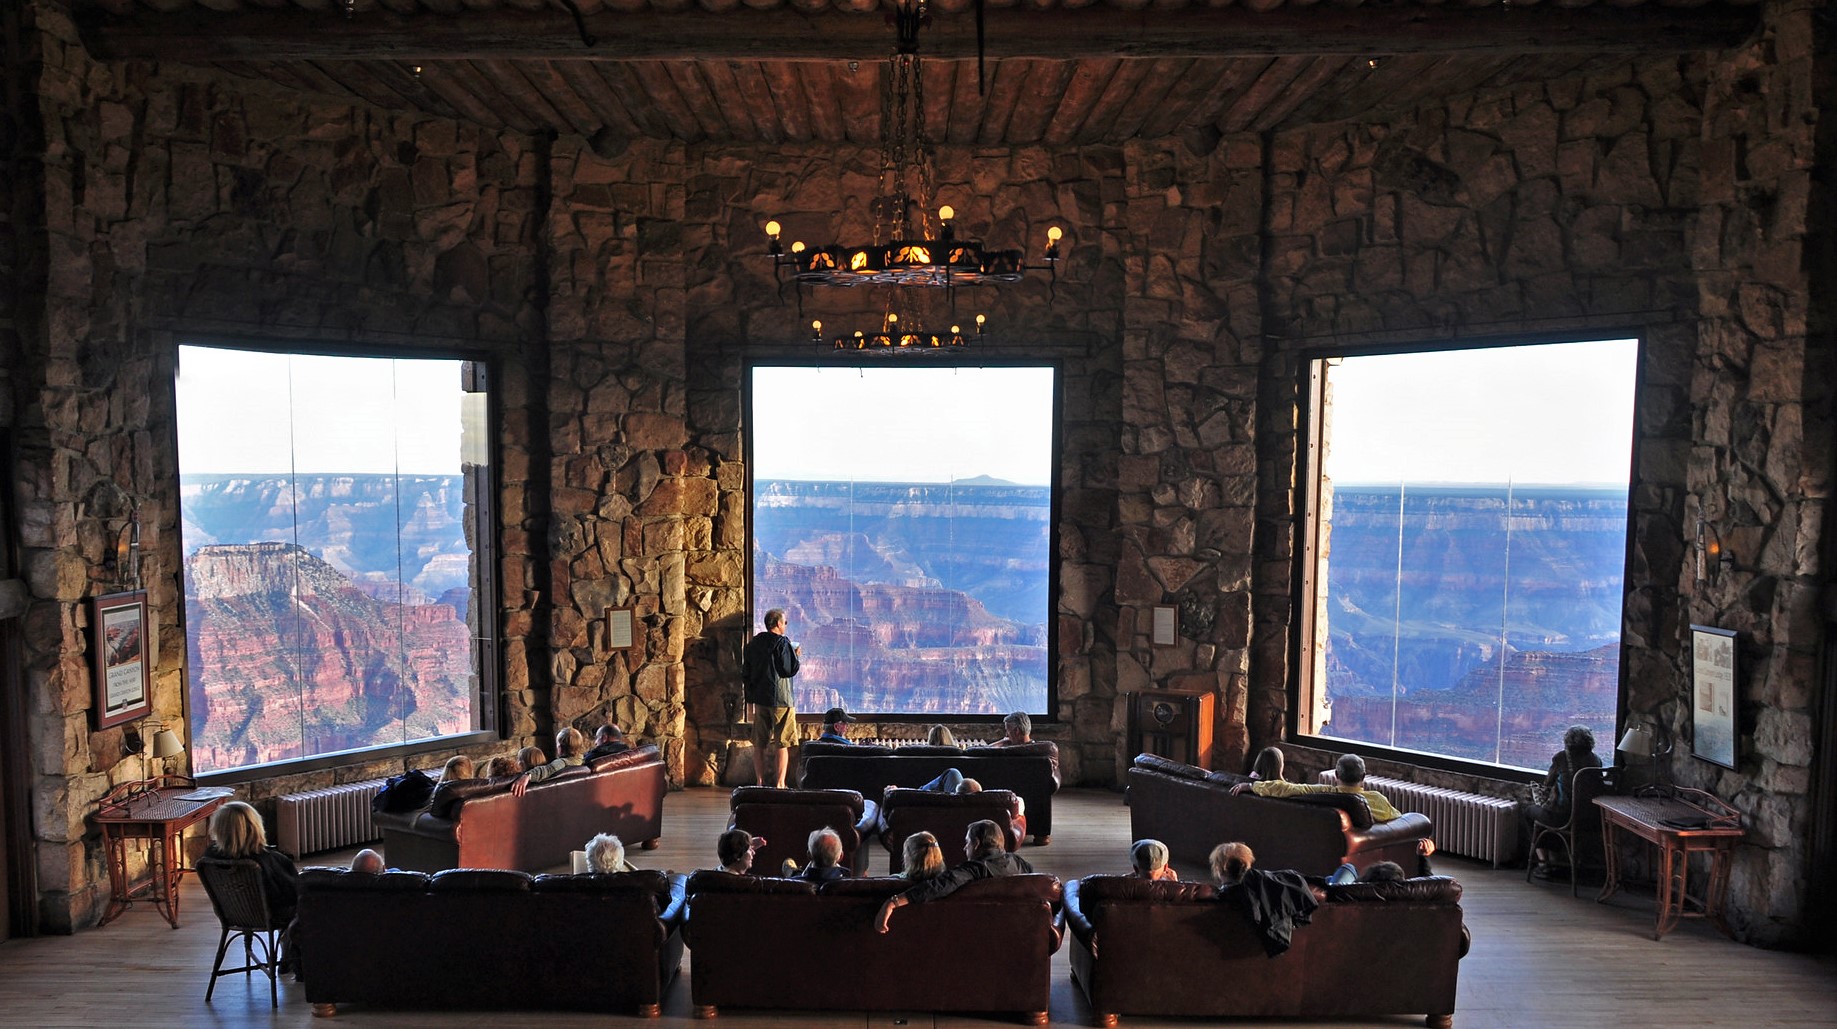 Guests of the North Rim Lodge